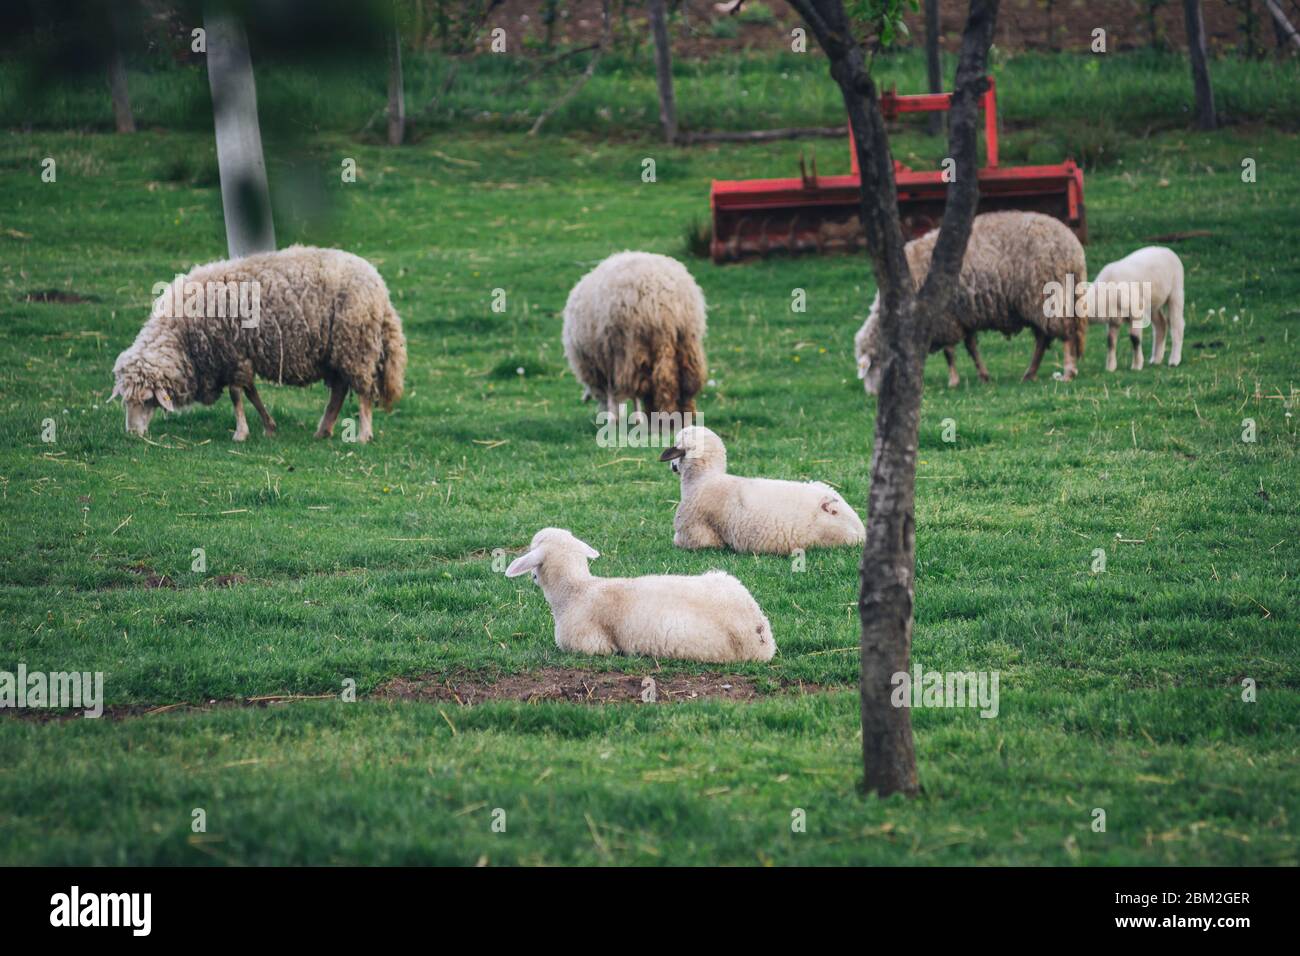 Herd of sheep on the farm Stock Photo